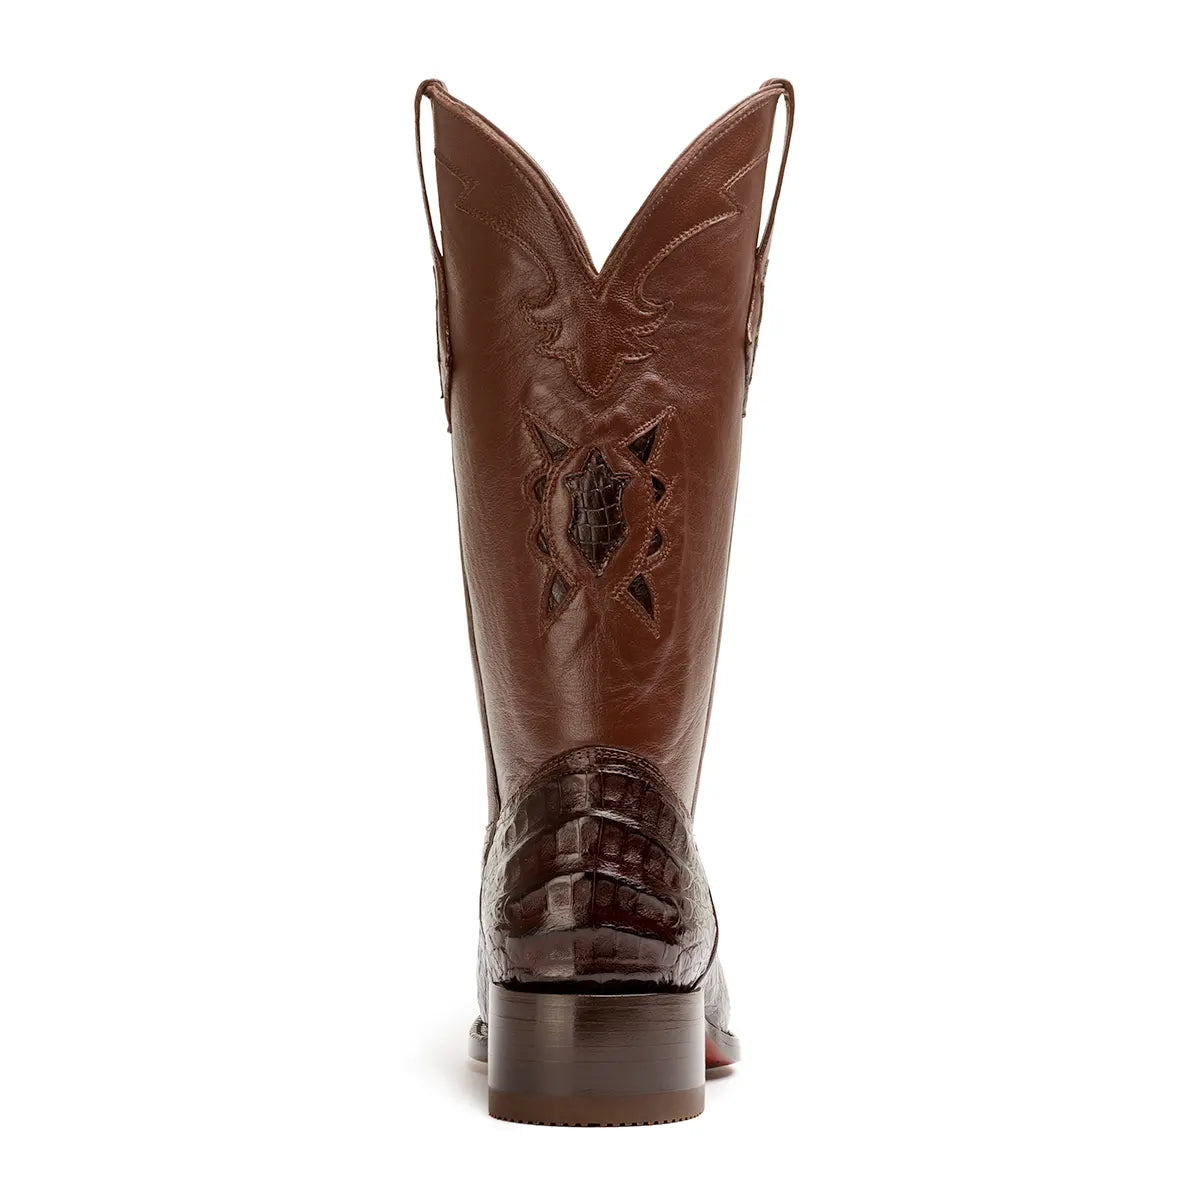 Vicente Caiman Belly Spanish Toe Boot - Brown